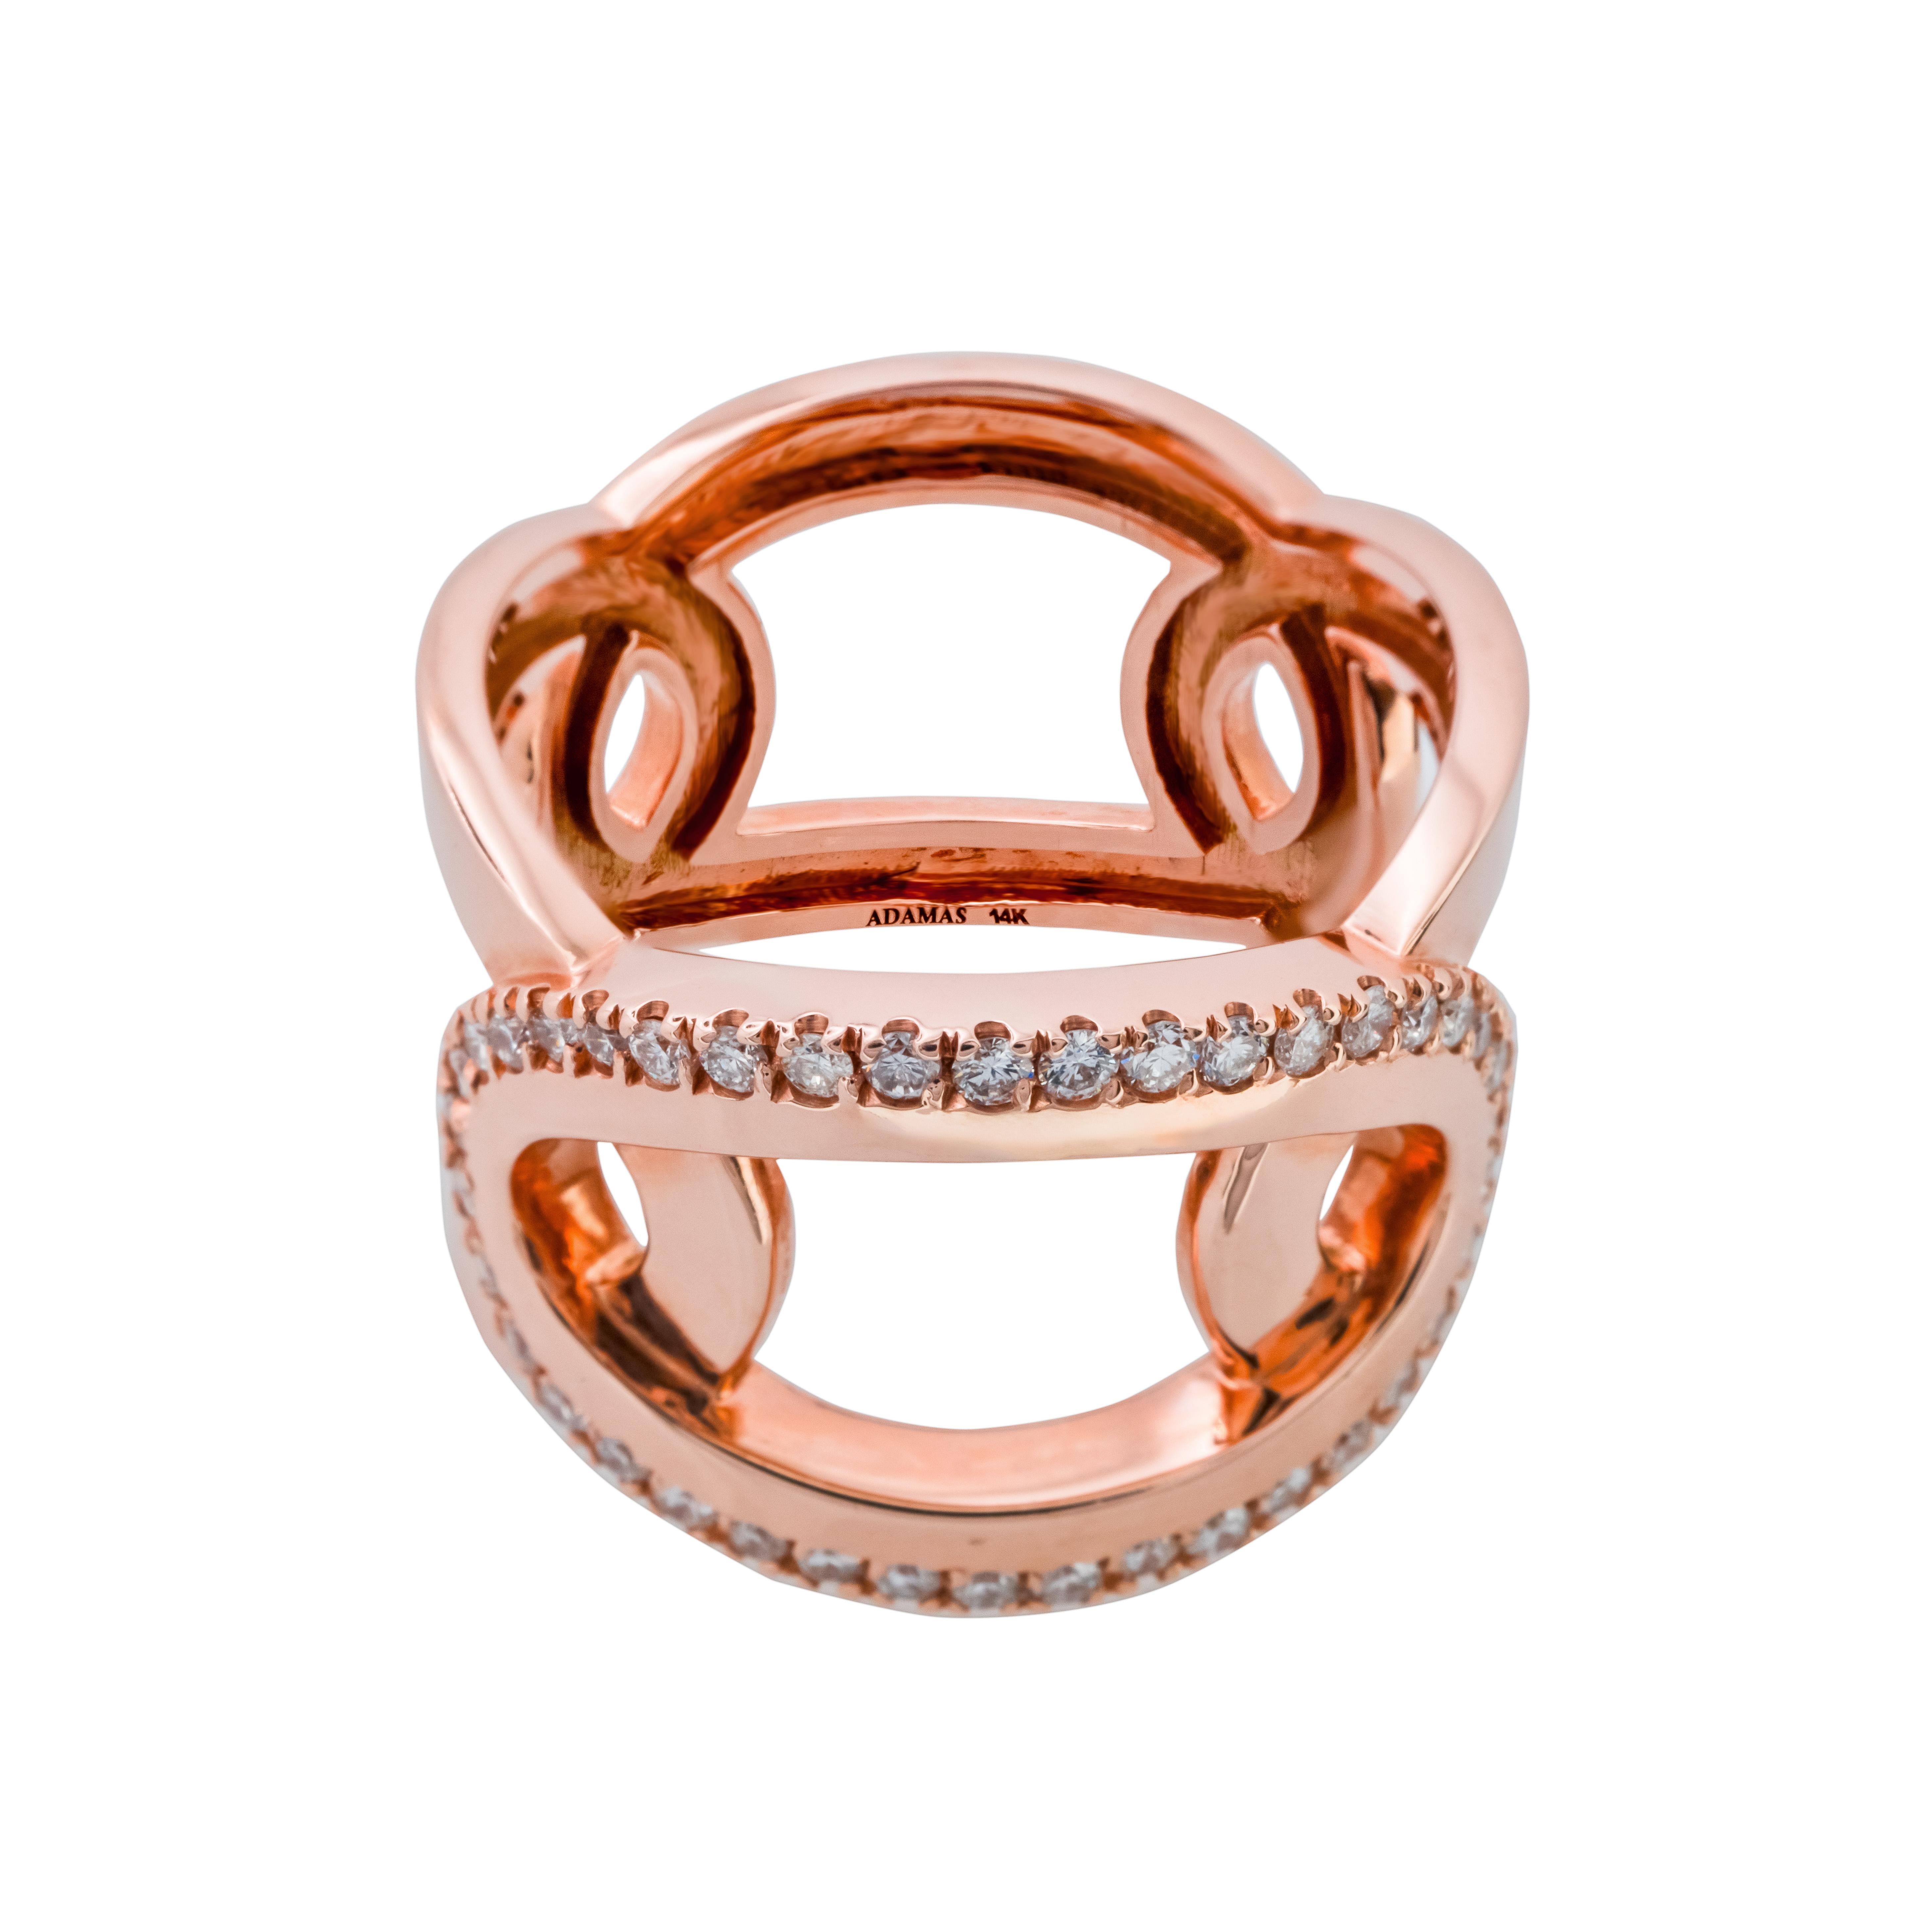 This unique band ring features 40 round brilliant cut diamonds with a total carat weight of .38cts, which are mounted in an oval band design crafted in radiant 14k rose gold, creating a modern and chic look. Whether worn alone for a subtle statement